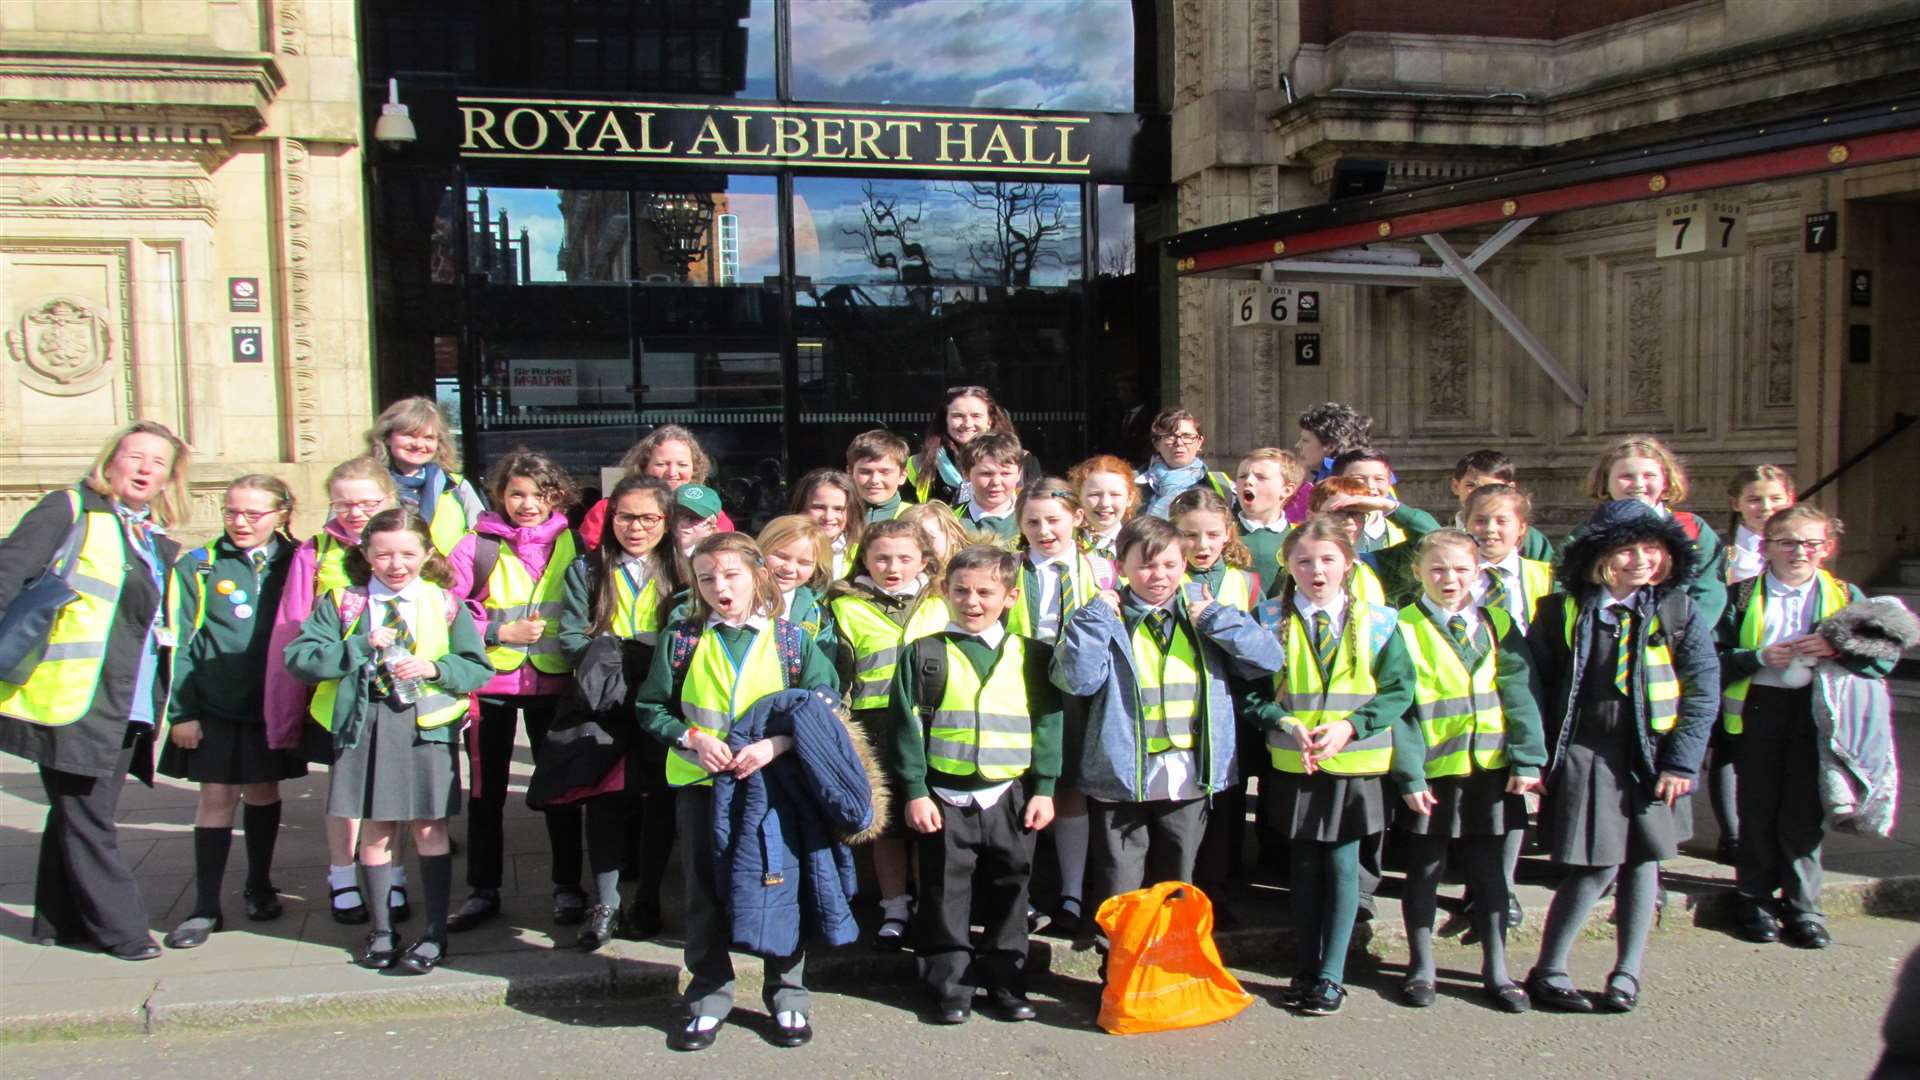 Singers from Deal Parochial School who performed at the Royal Albert Hall.